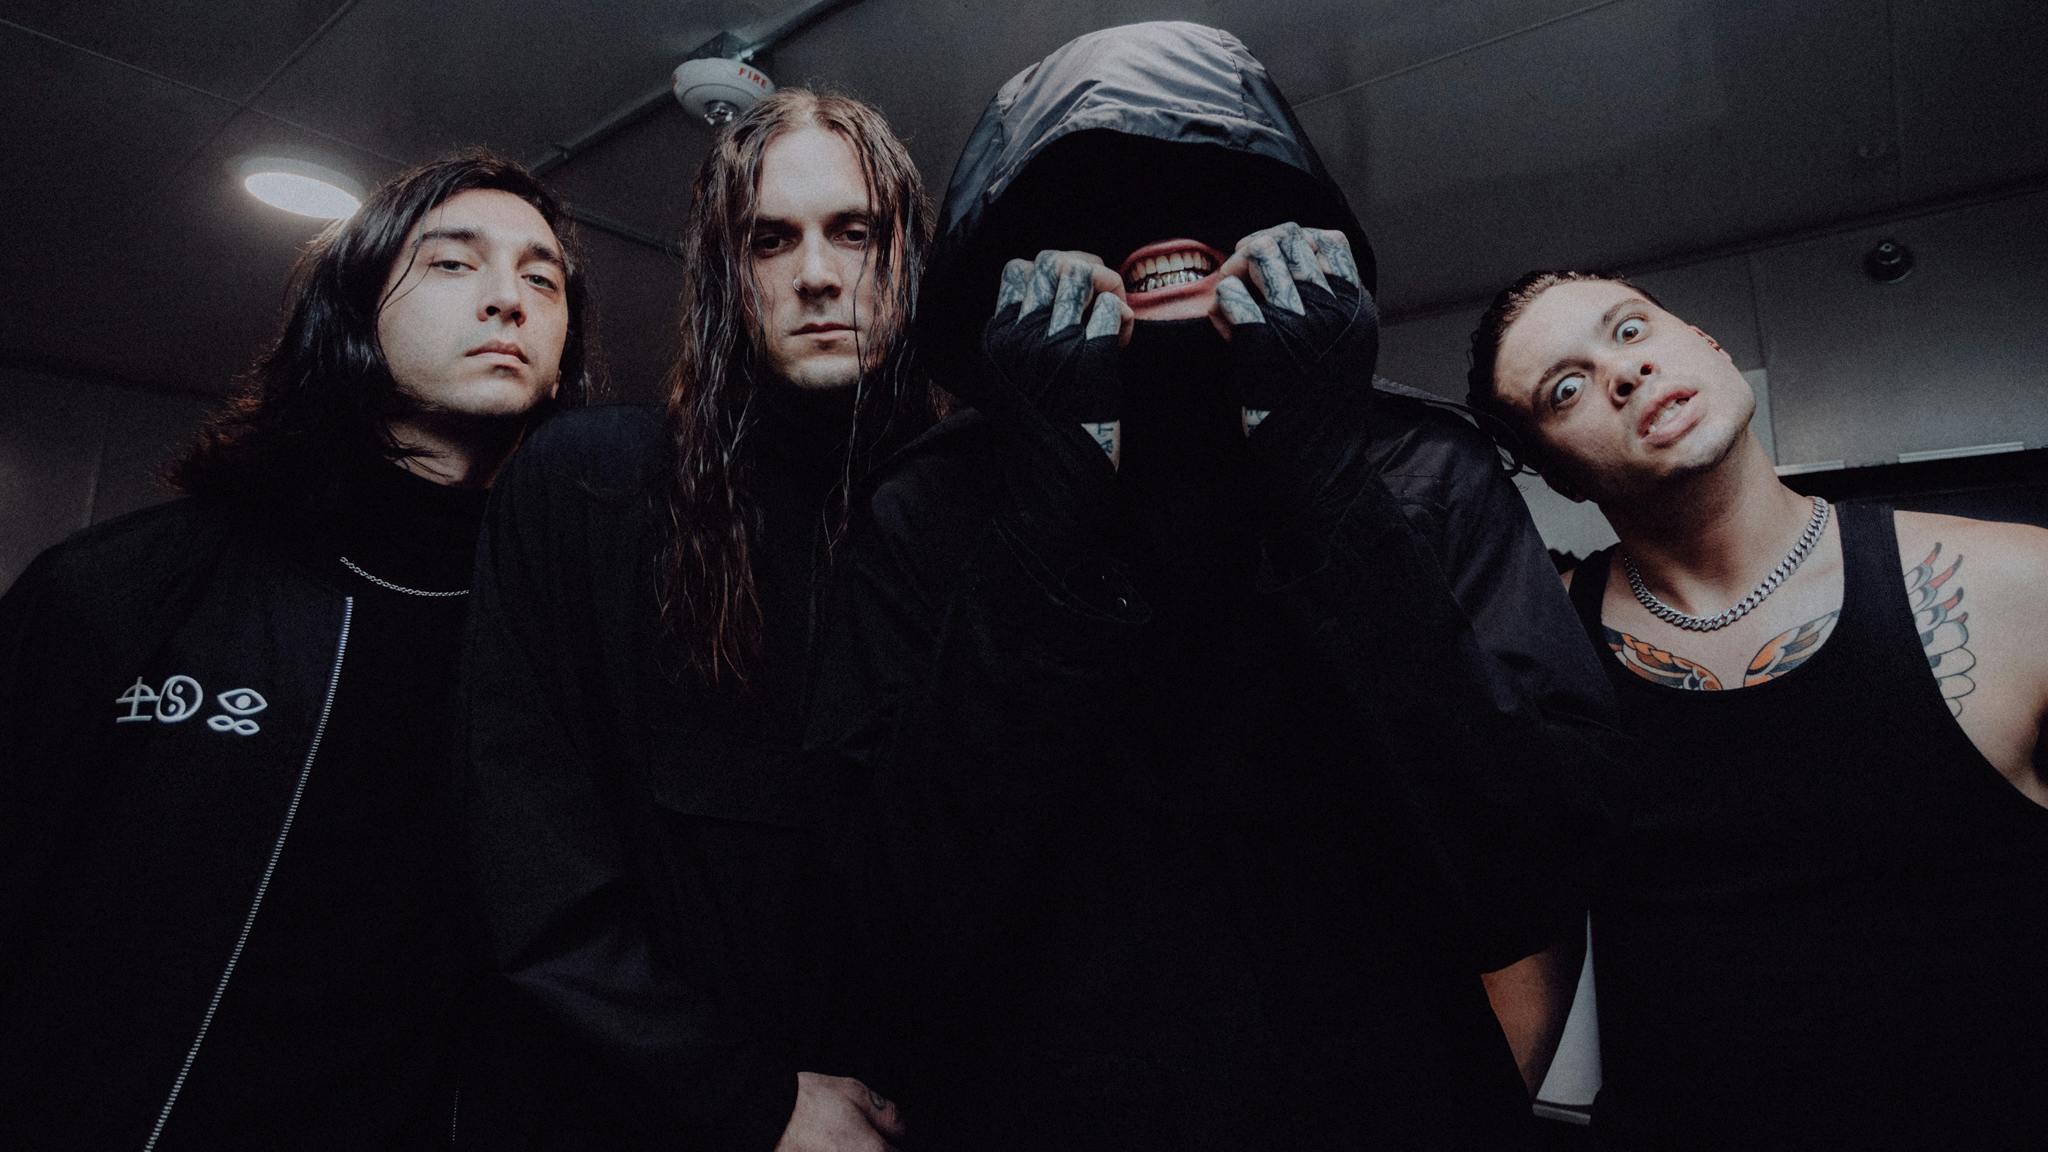 Bad Omens: “We’re not going to do anything to compromise this”